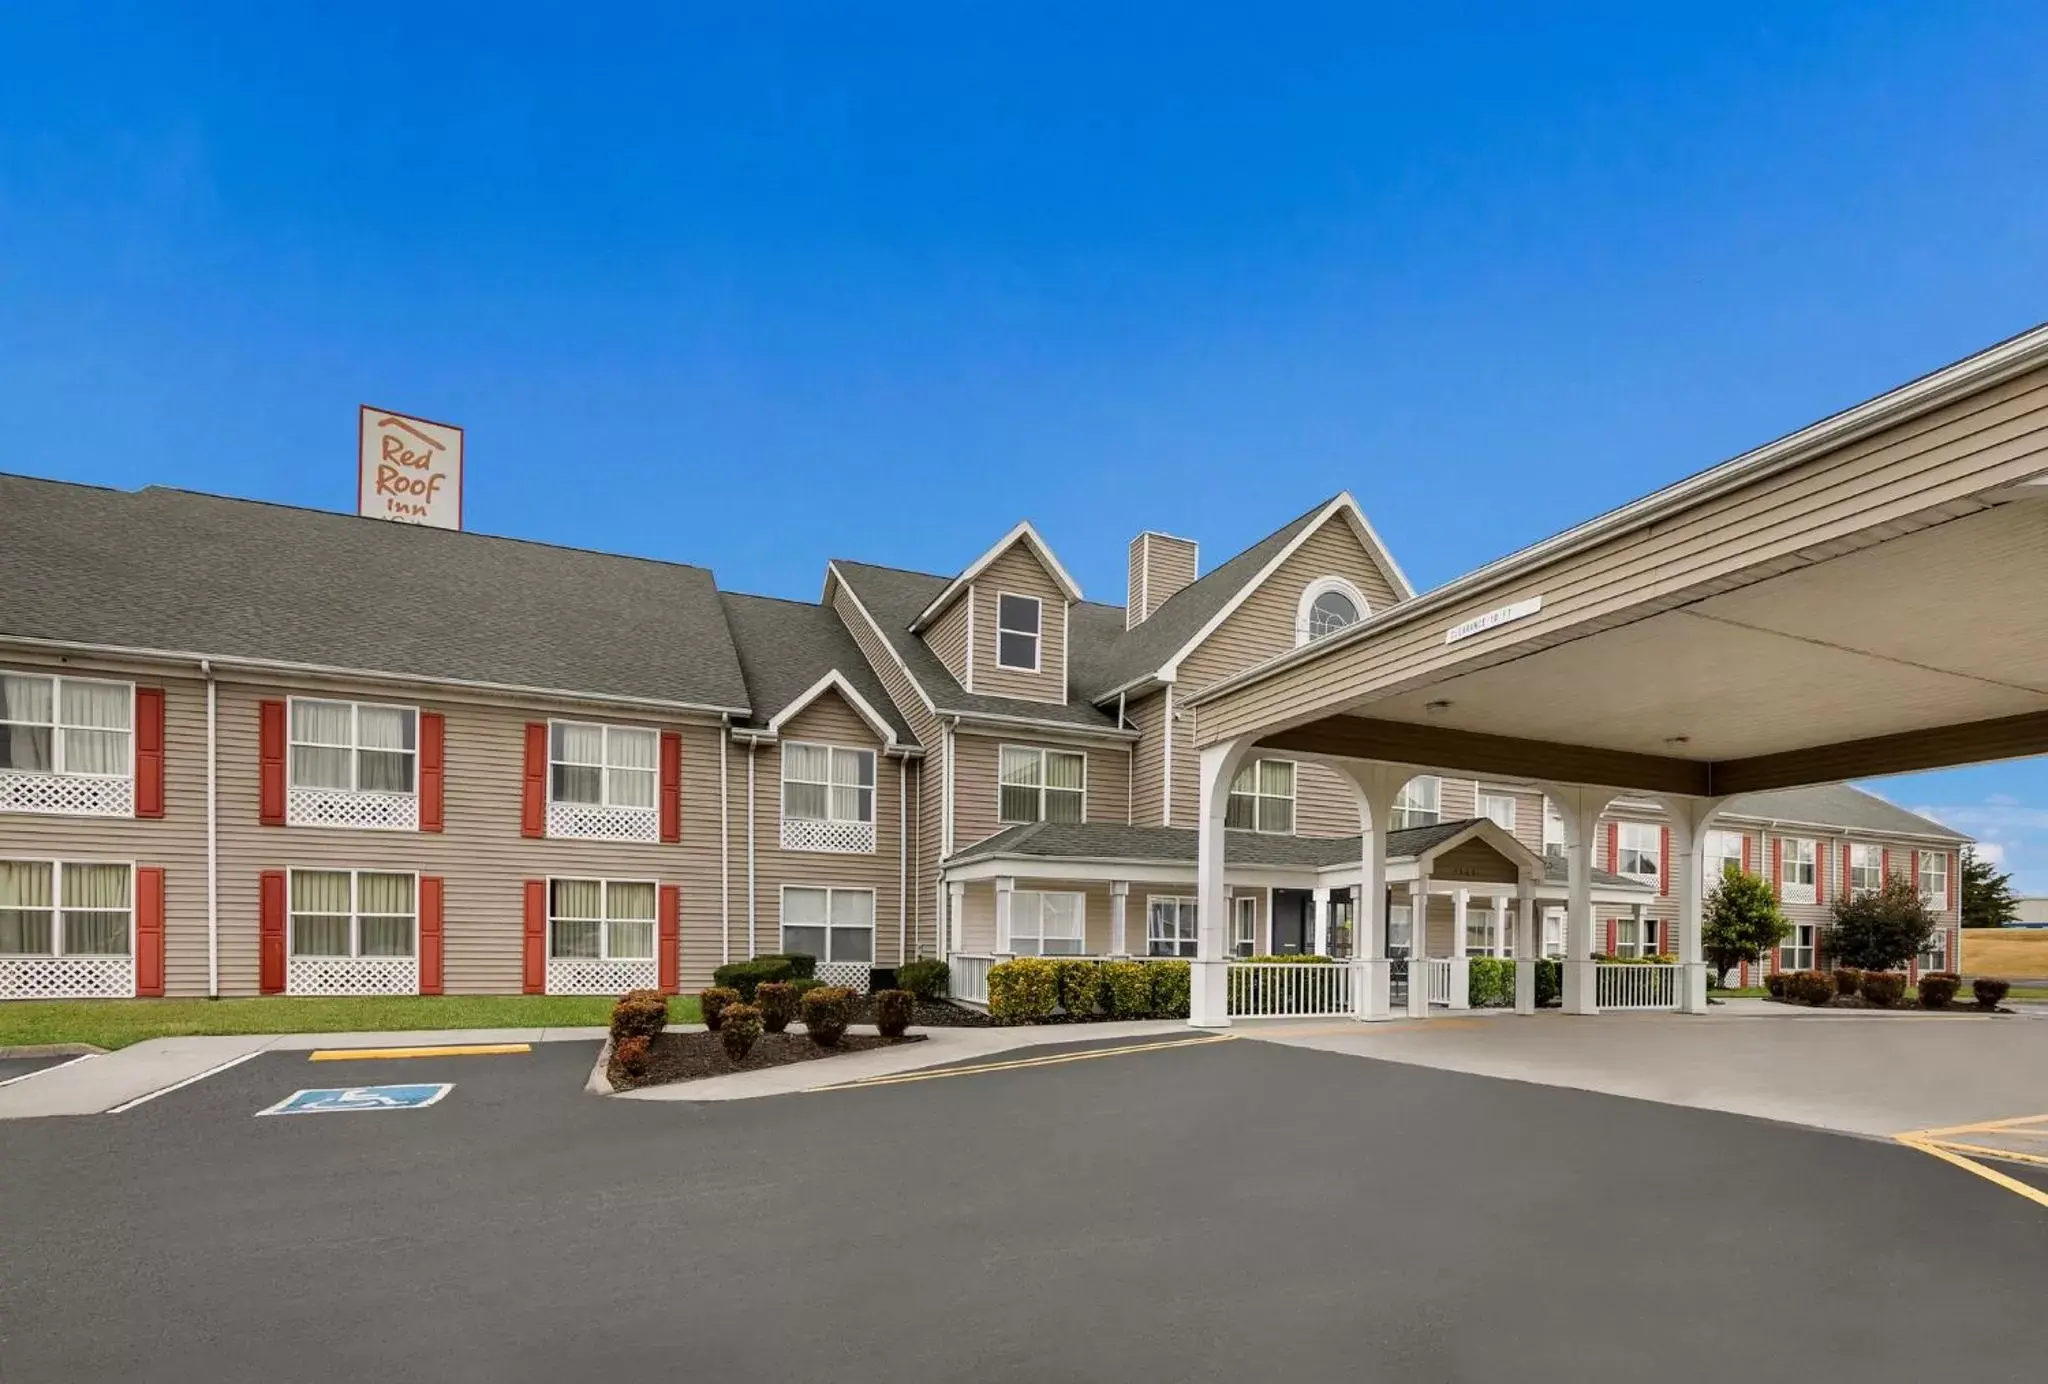 Property Building in Red Roof Inn & Suites Knoxville East